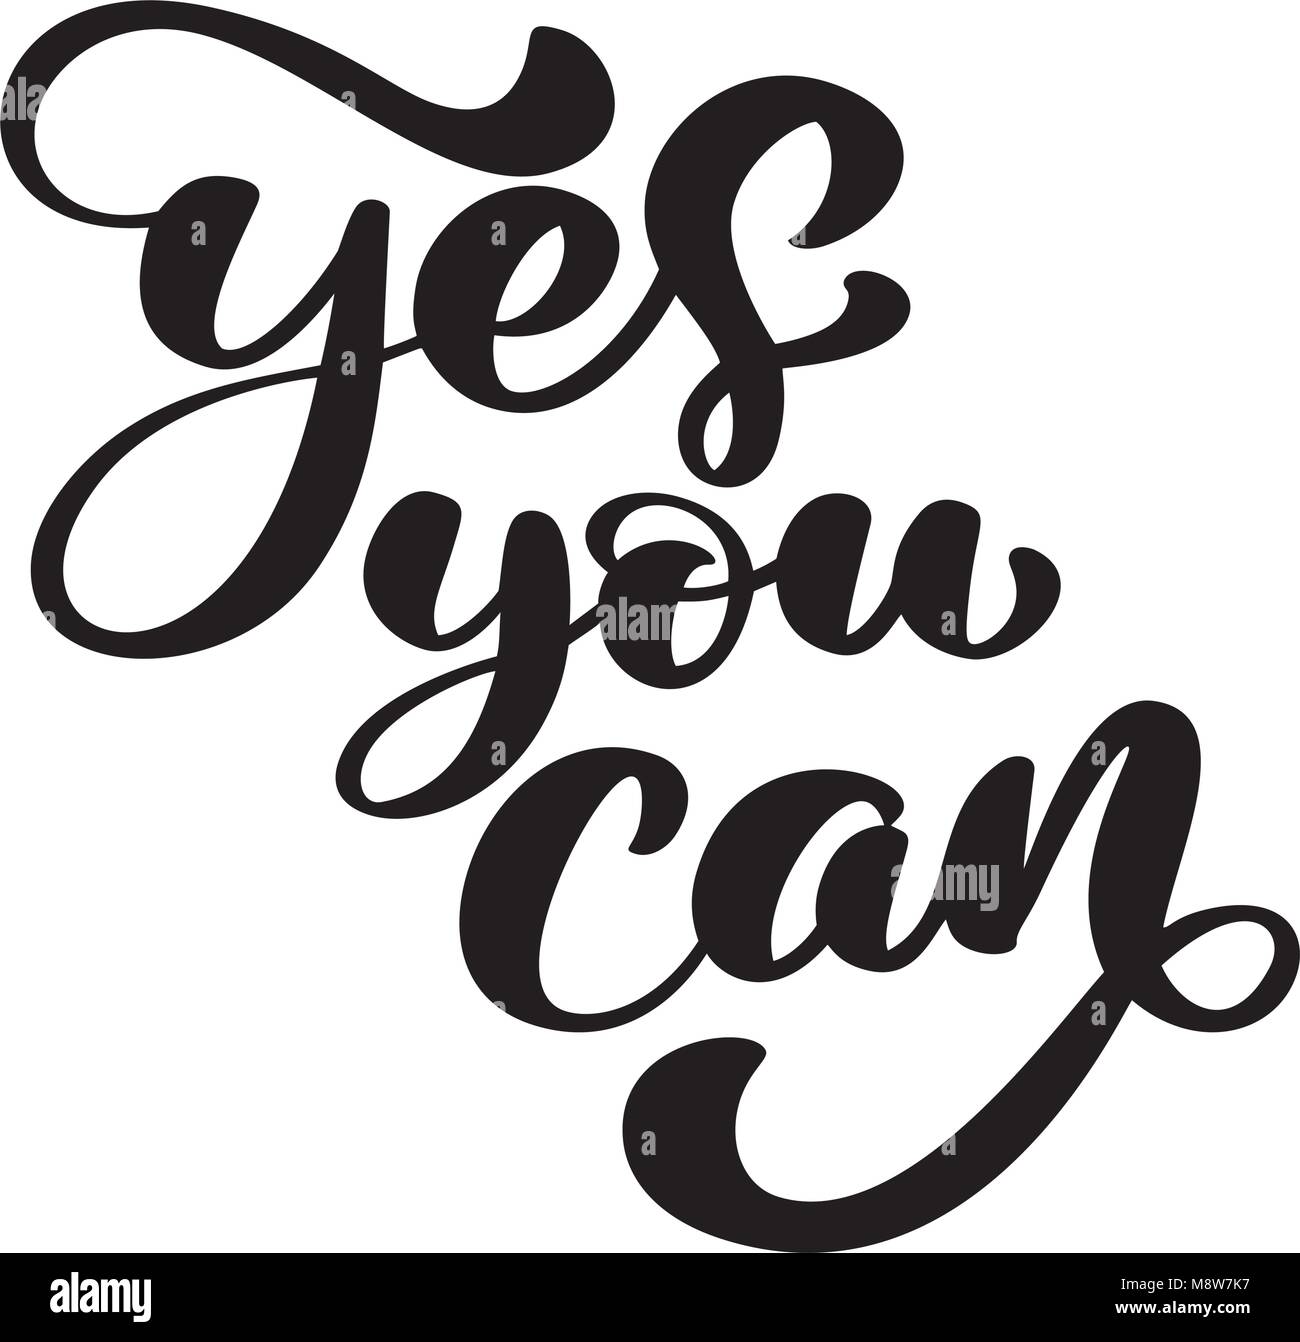 https://c8.alamy.com/comp/M8W7K7/inspirational-quote-yes-you-can-hand-written-calligraphy-text-motivational-M8W7K7.jpg